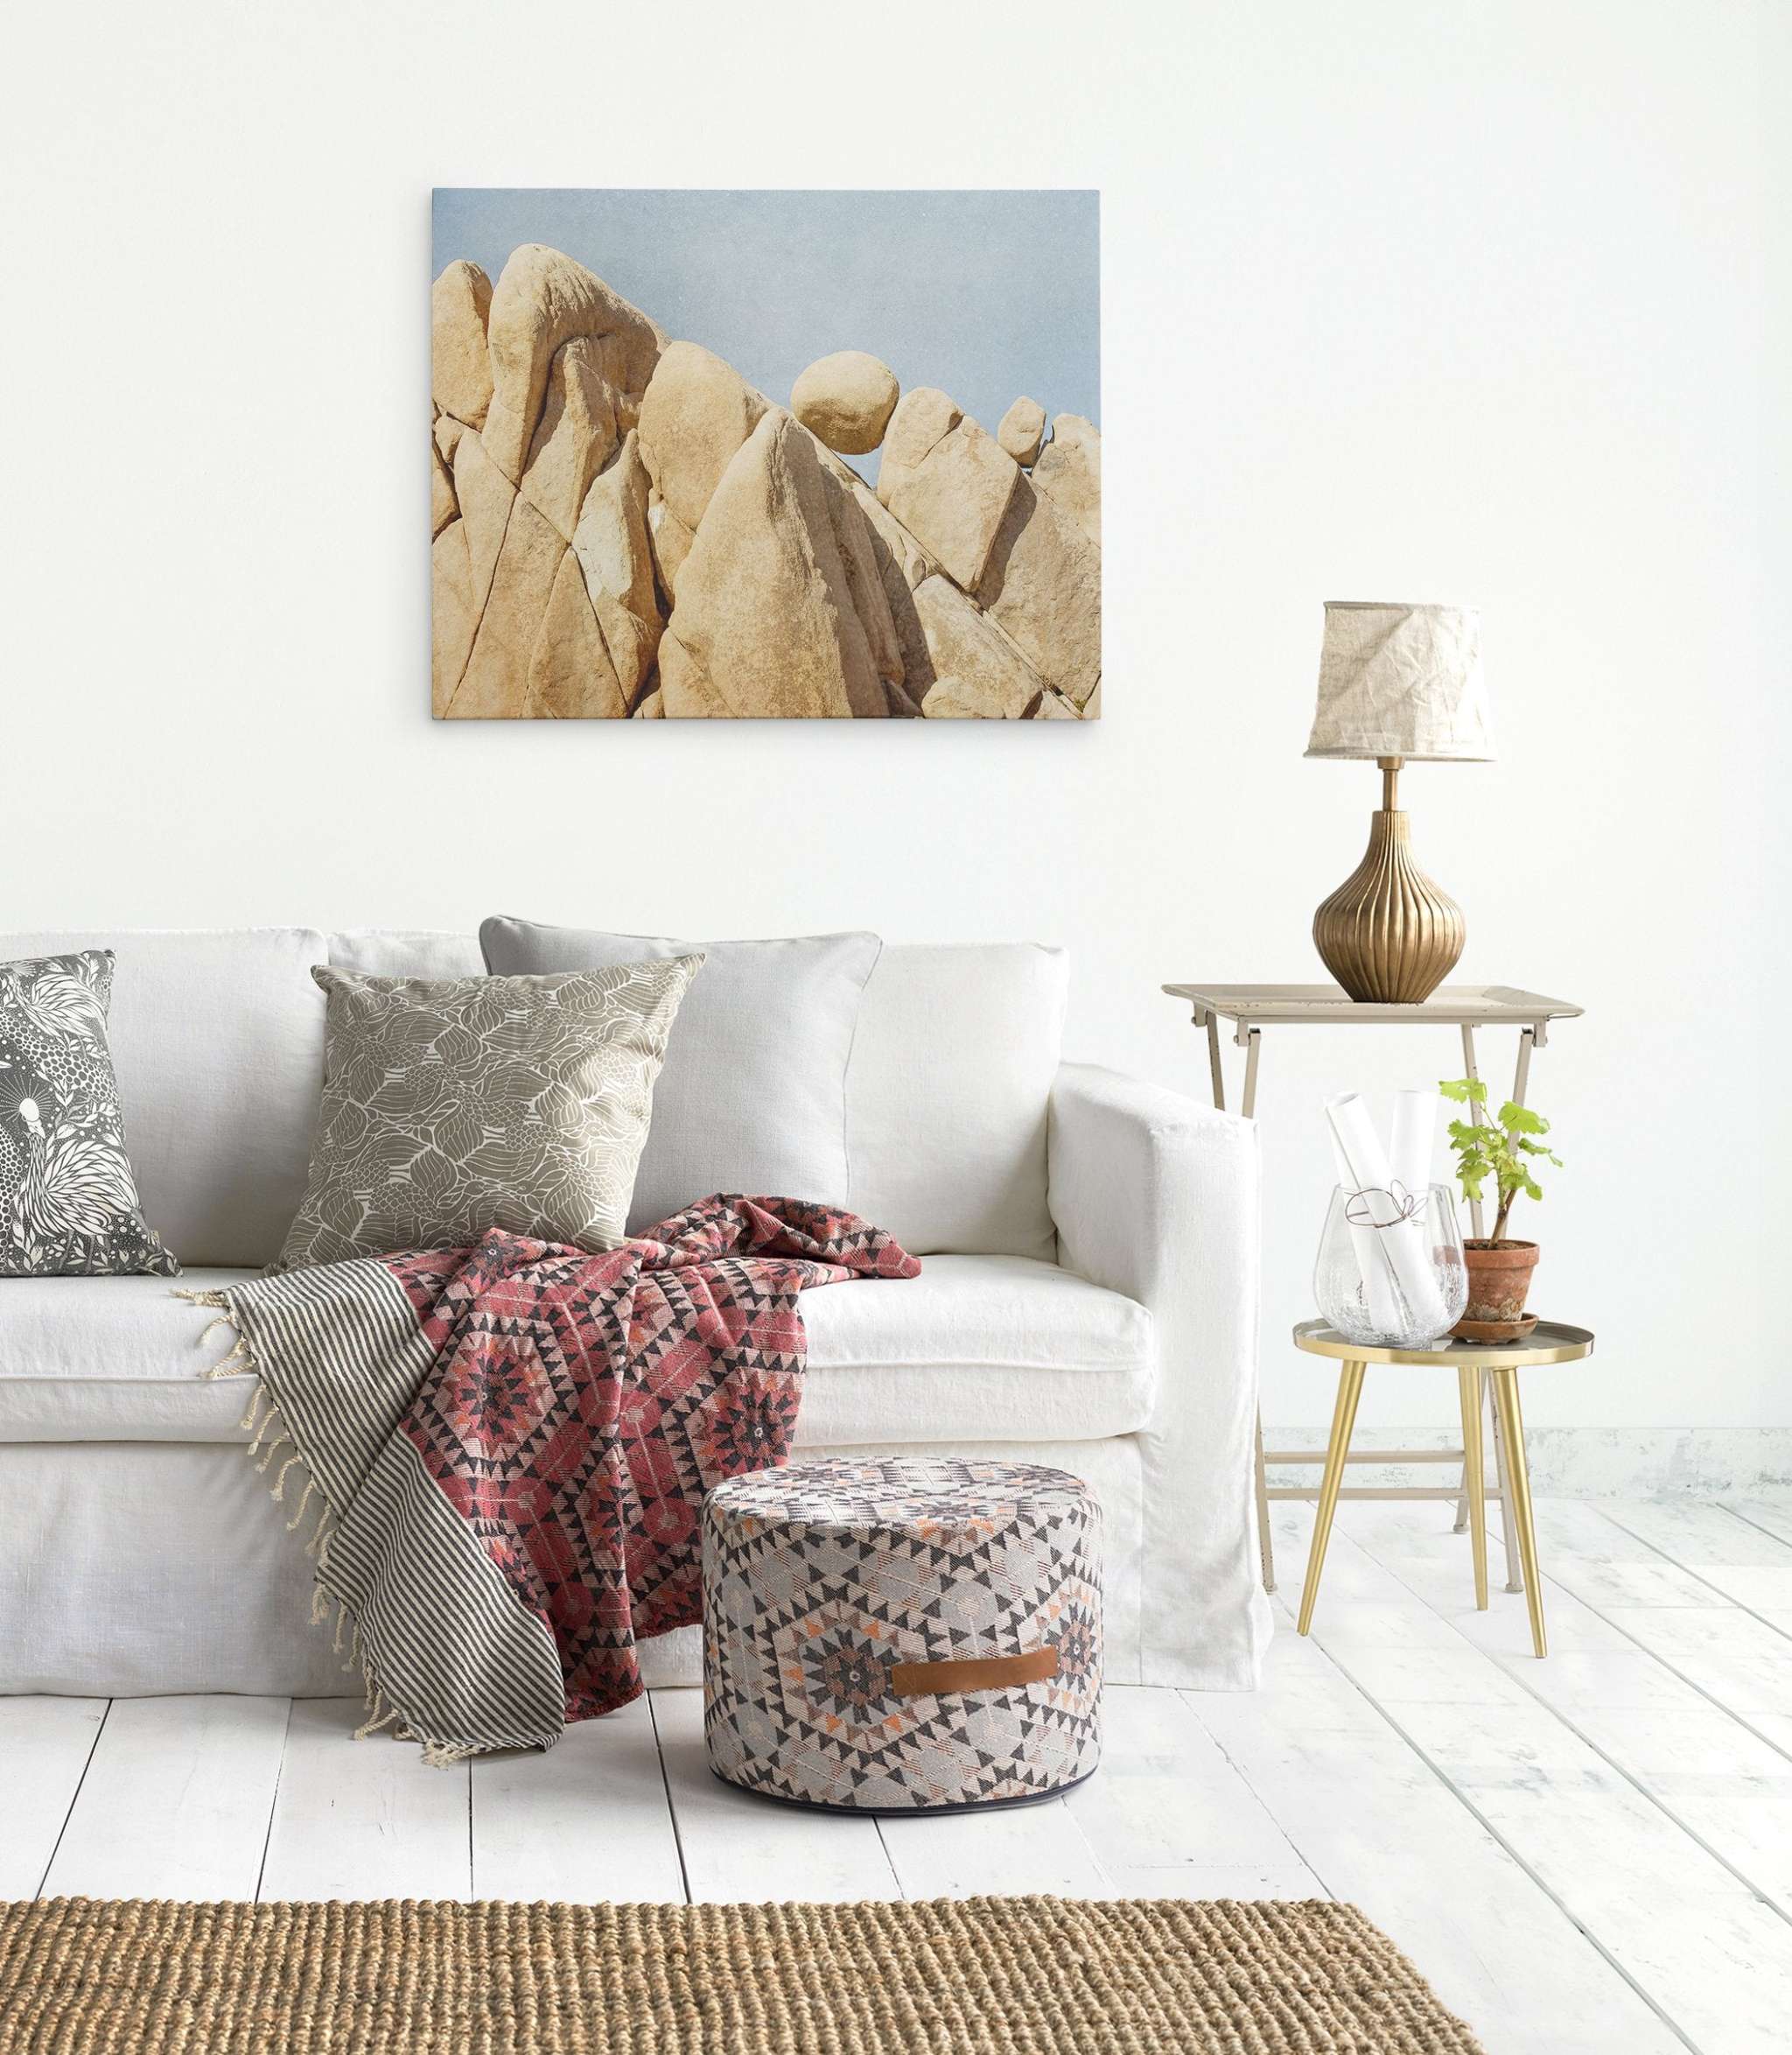 A minimalist living room features a white sofa adorned with patterned pillows and a red geometric throw blanket. A patterned ottoman and a small side table with a lamp, potted plant, and books sit nearby. A Joshua Tree Canvas Wall Art, 'Rock Formations' by Offley Green hangs on the white wall.